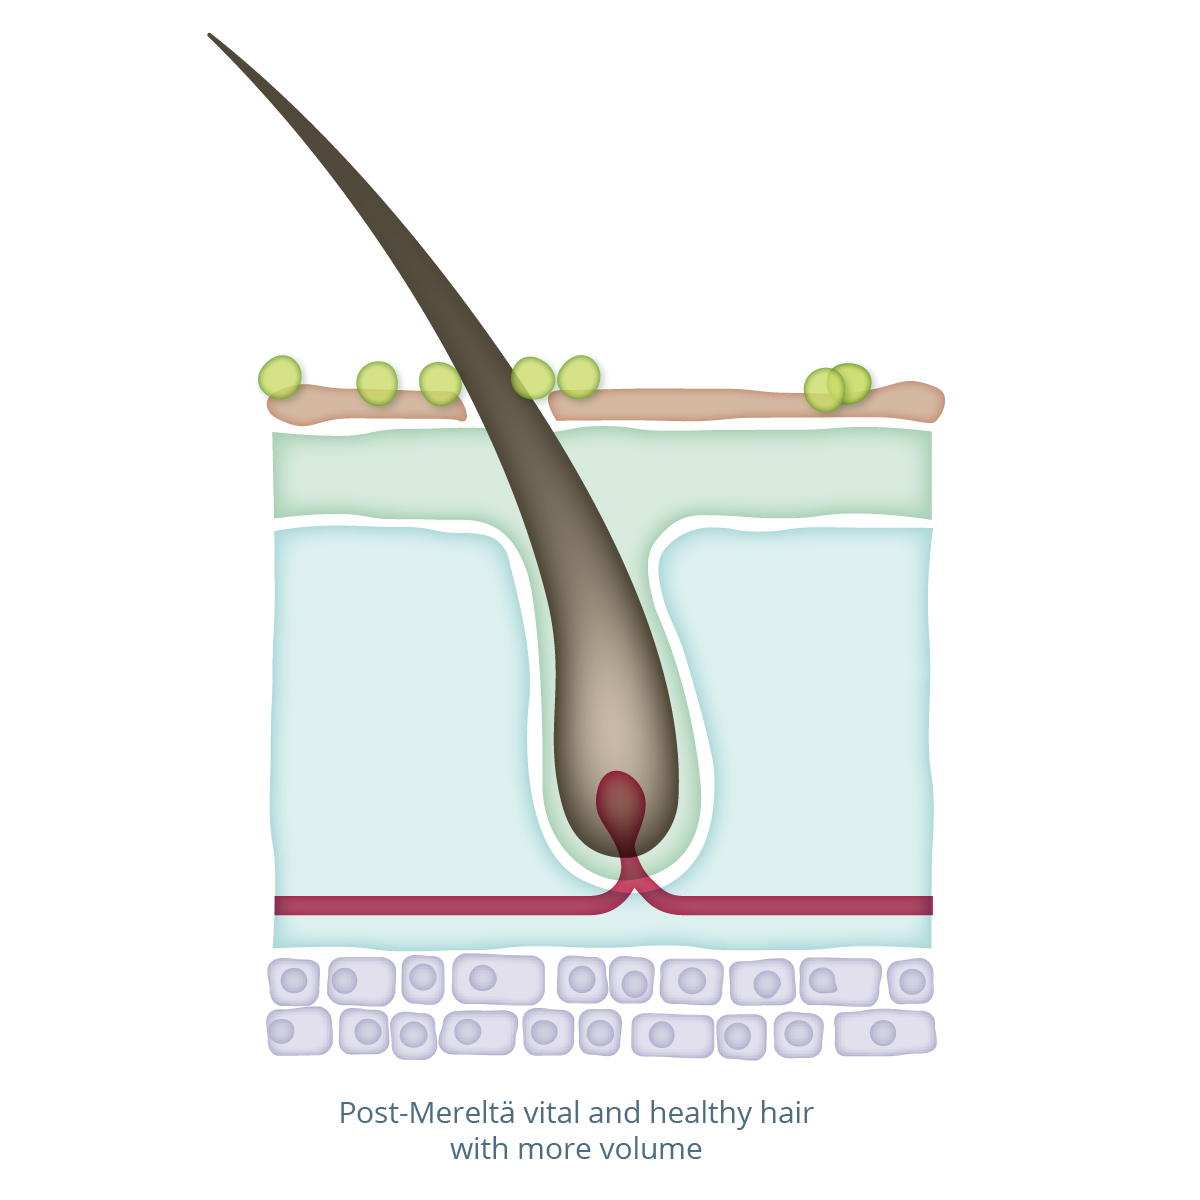 Image depicting vital and healthy hair post-Mereltä use.